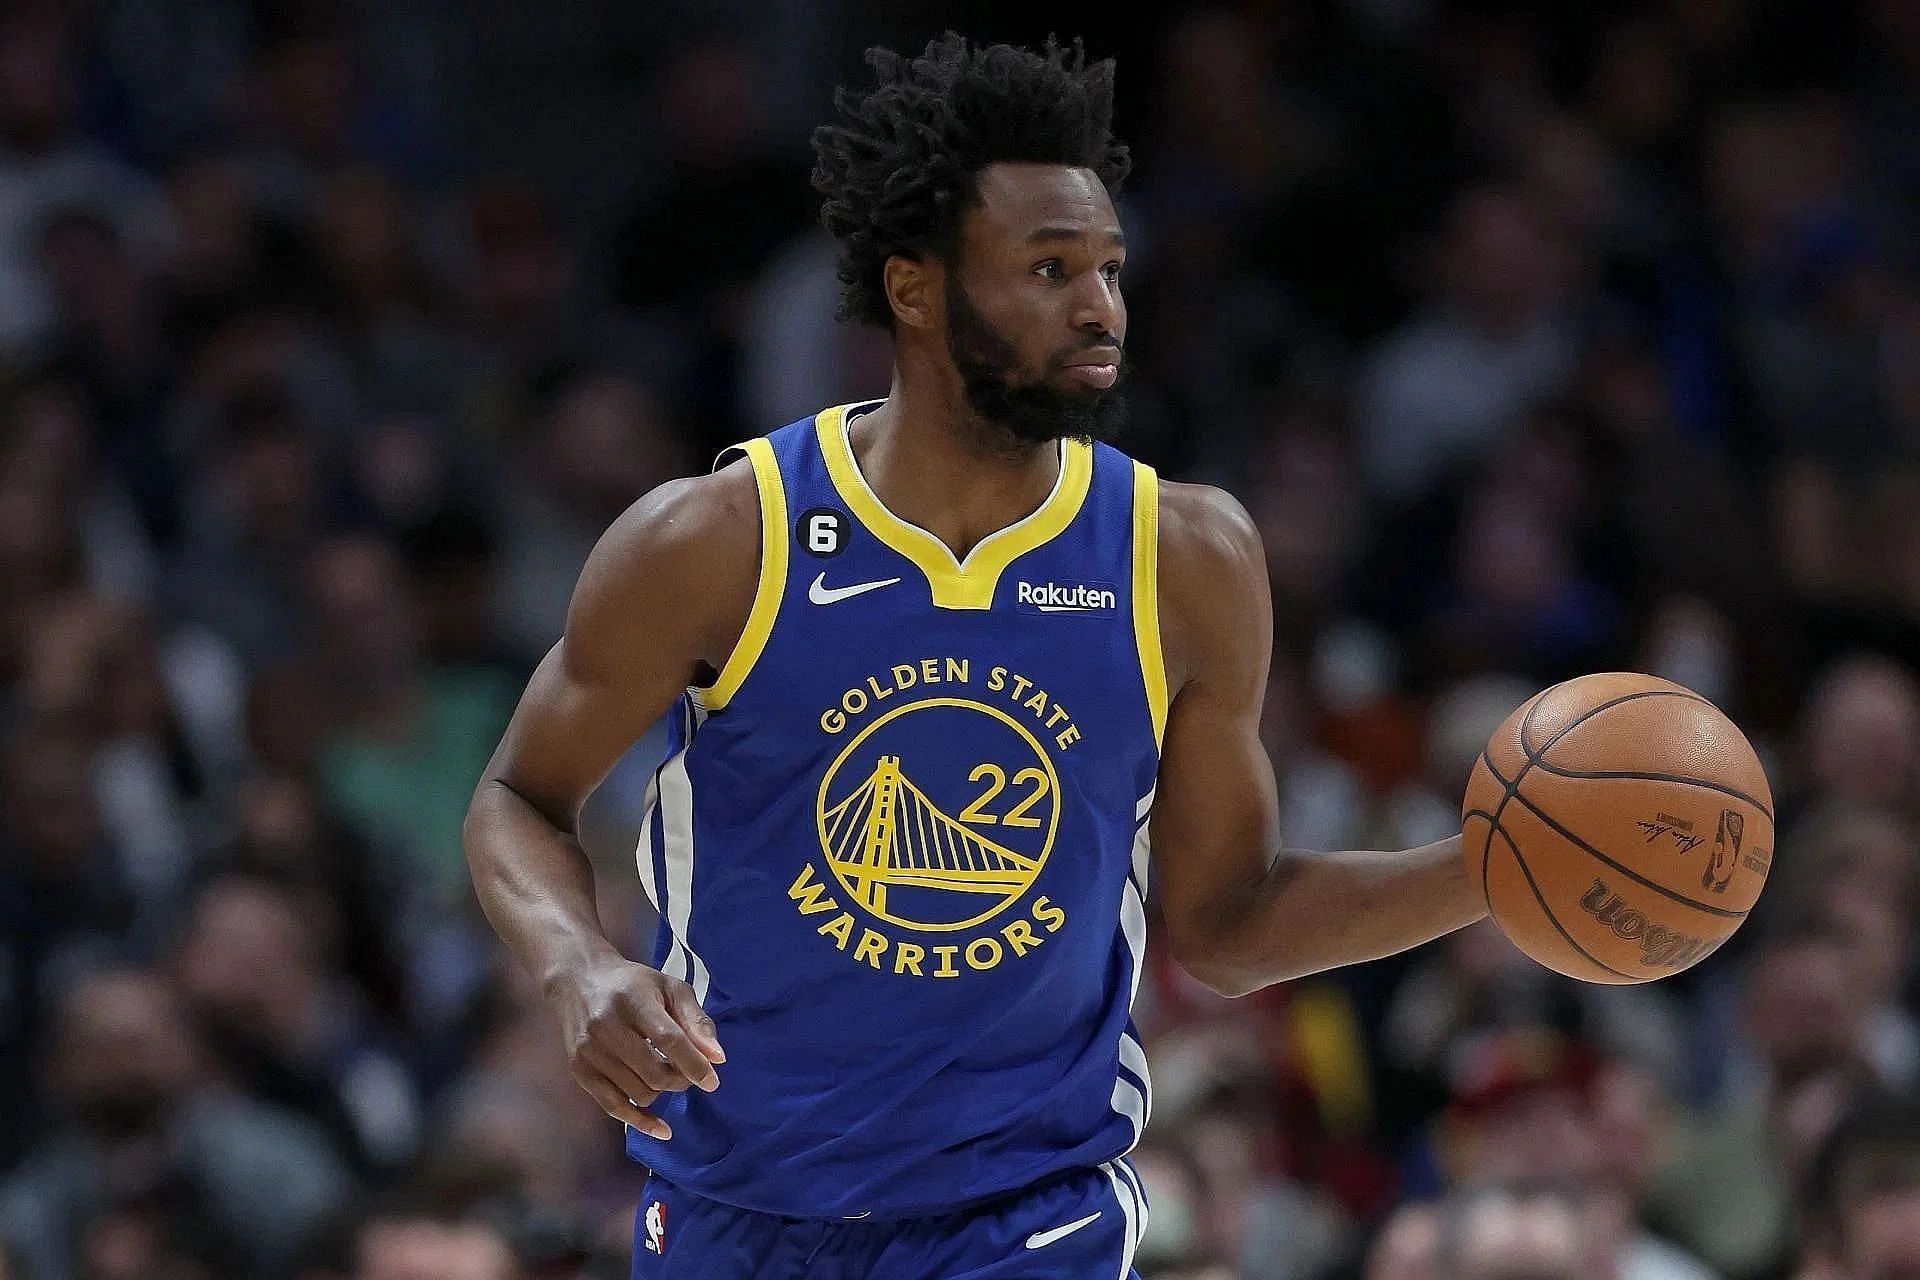 Golden State Warriors forward Andrew Wiggins drained a clutch triple late in their game against the Oklahoma City Thunder on Saturday.